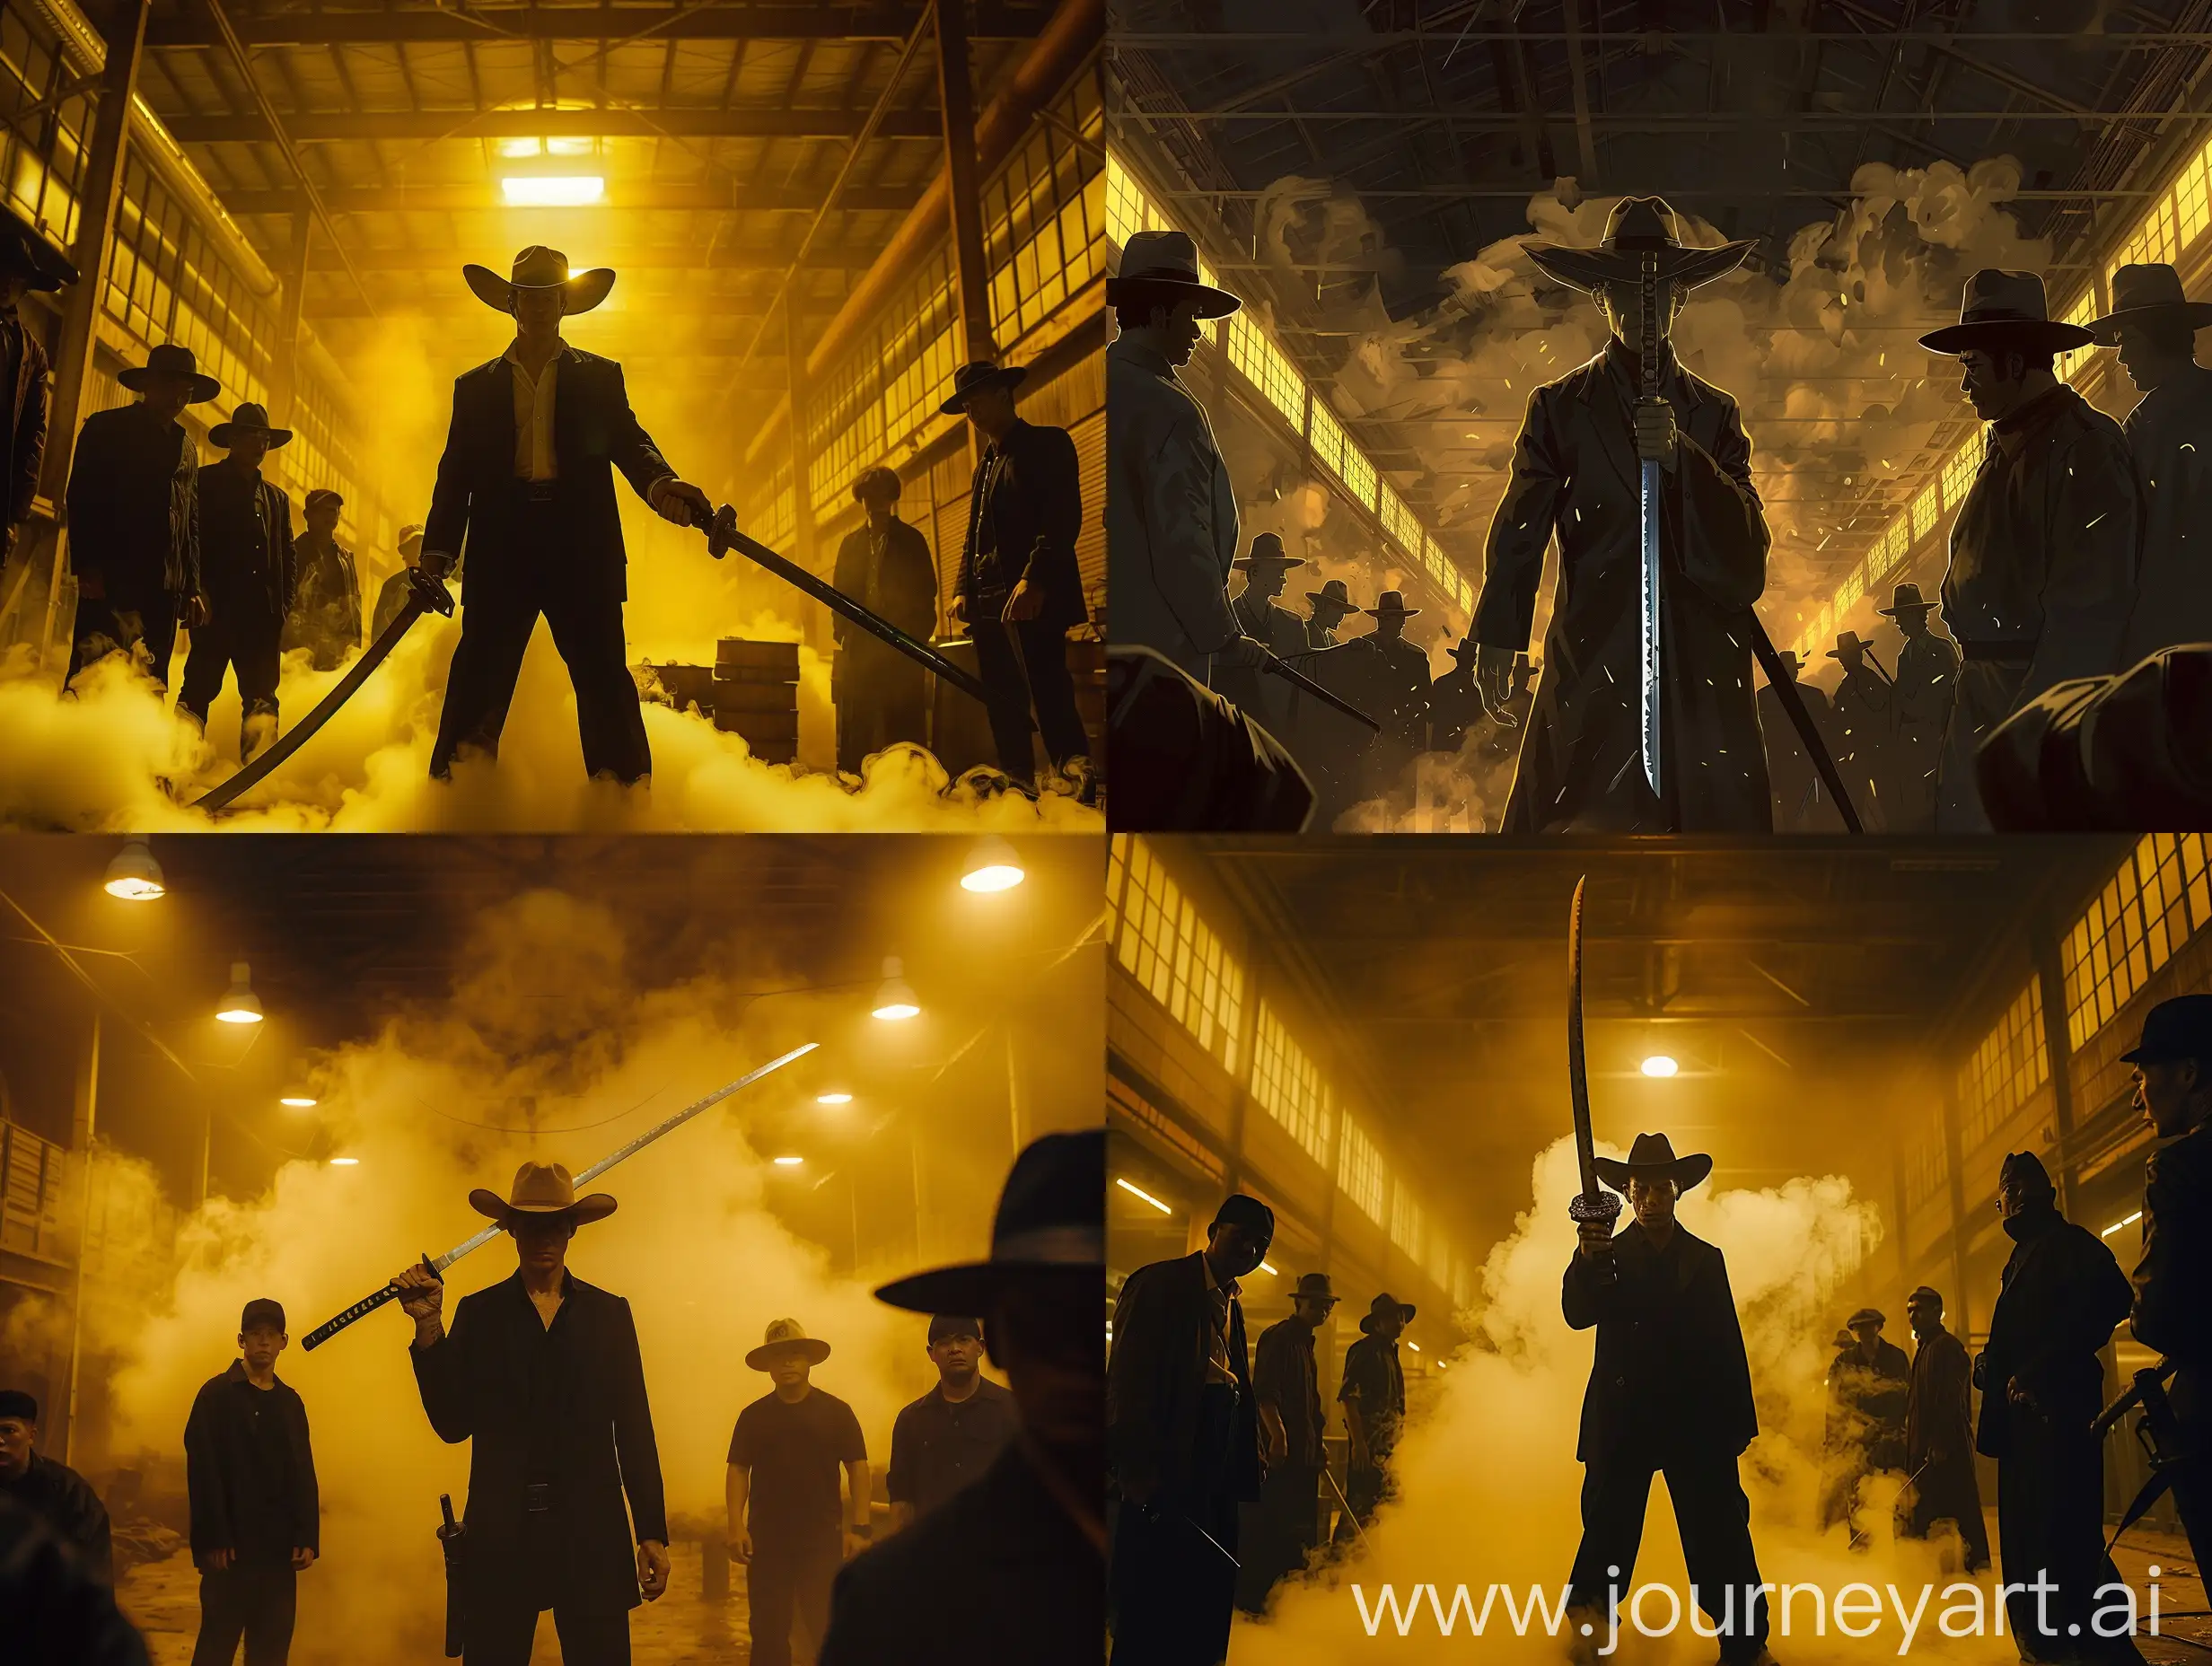 In a dark warehouse, under dim yellow lights, smoke swirls and a strong atmosphere of crime permeates. A figure dressed in a classic black suit and a low hanging cowboy hat, as if it was a reproduction of a gangster legend.
This character stands in the center of the warehouse, his gaze sharp and cold, revealing an invincible aura. He held an ancient samurai sword, with its blade flashing a cold light in the dim light, as if indicating his ruthlessness and determination.
The gang members around him quietly surrounded him, staring at him in awe. This character is like an insurmountable mountain, inspiring awe in everyone's hearts. His existence is law, it is command.
When he raised his samurai sword, the entire warehouse seemed to be quiet, and a tense atmosphere filled the air. Under his figure, all the darkness seemed to tremble, as if he were the master of the night, determining the boundary between life and death.
This character is like Shelby, cold and ruthless, yet full of a unique charm and authority. His existence makes people dare not rebel at all, and can only silently obey his will, as if he is the ruler in the darkness, omnipotent.